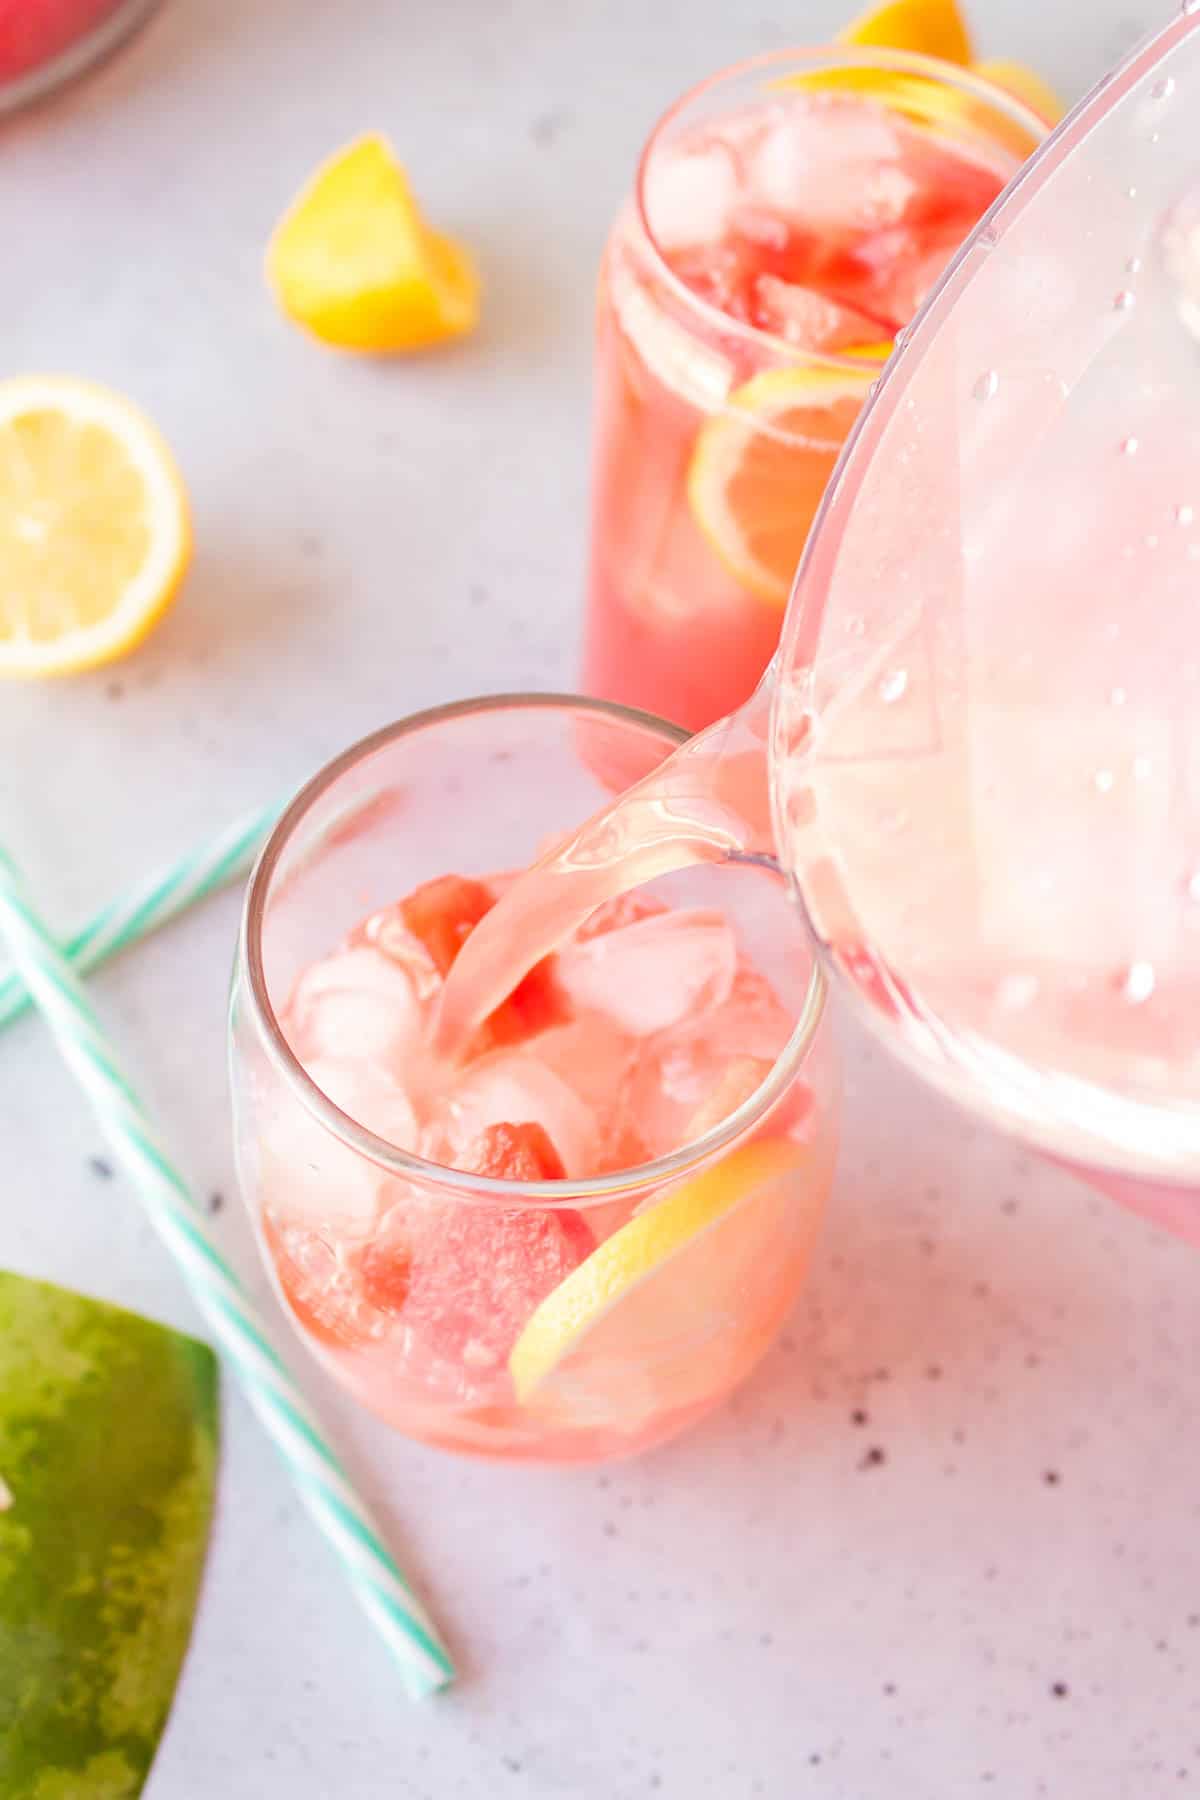 Pouring watermelon lemonade into a glass of ice, watermelon cubes, and lemon slices.